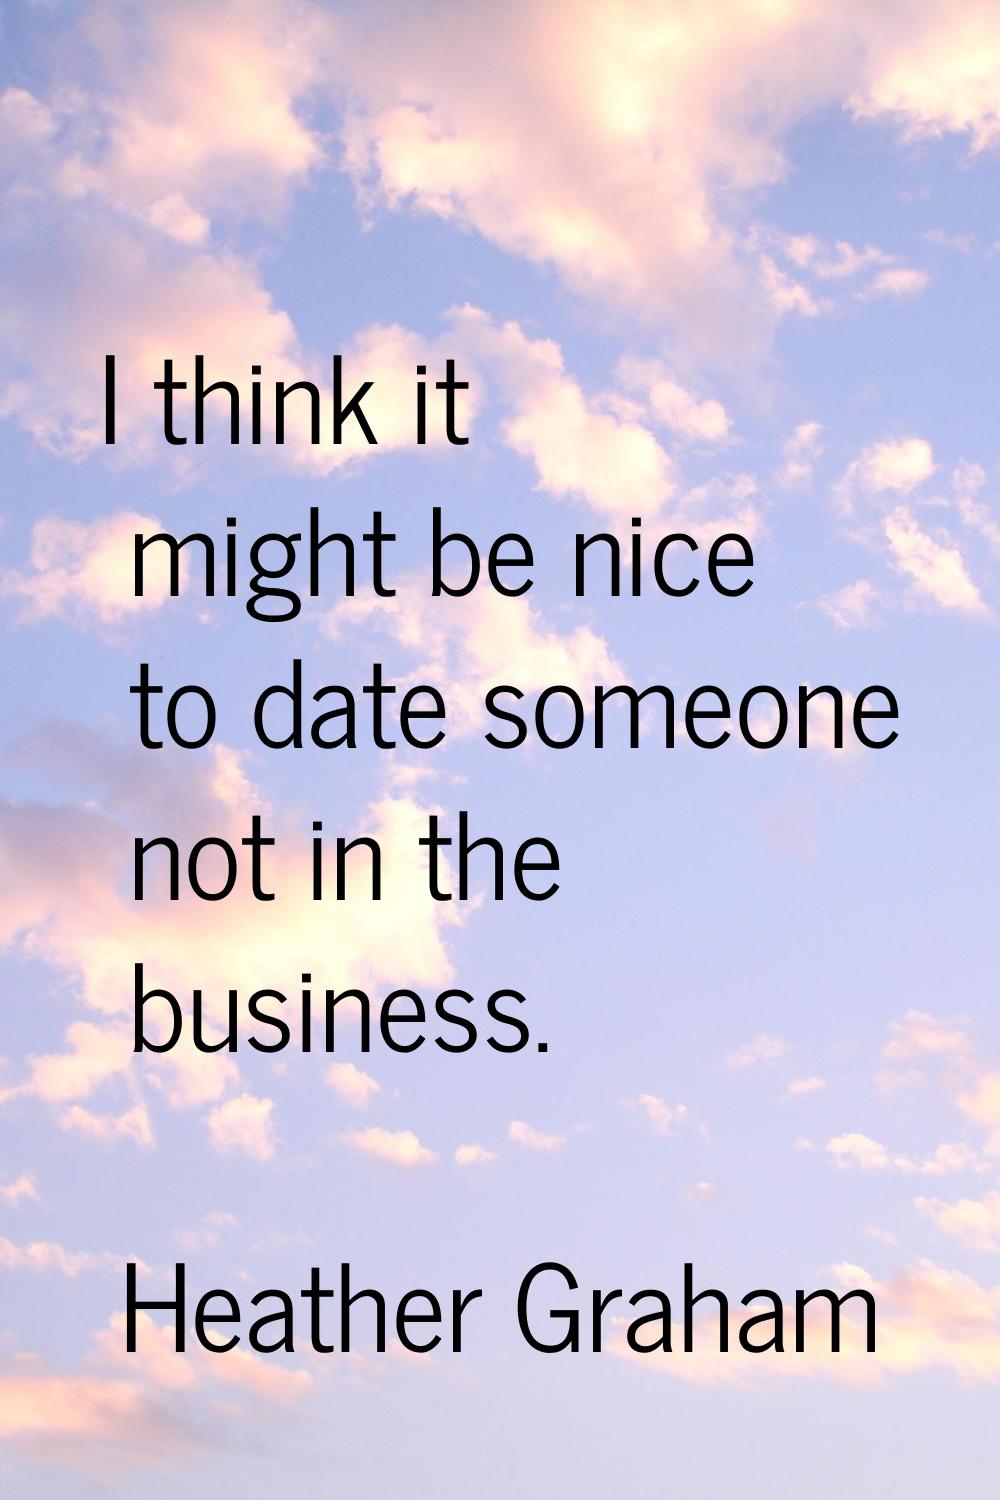 I think it might be nice to date someone not in the business.